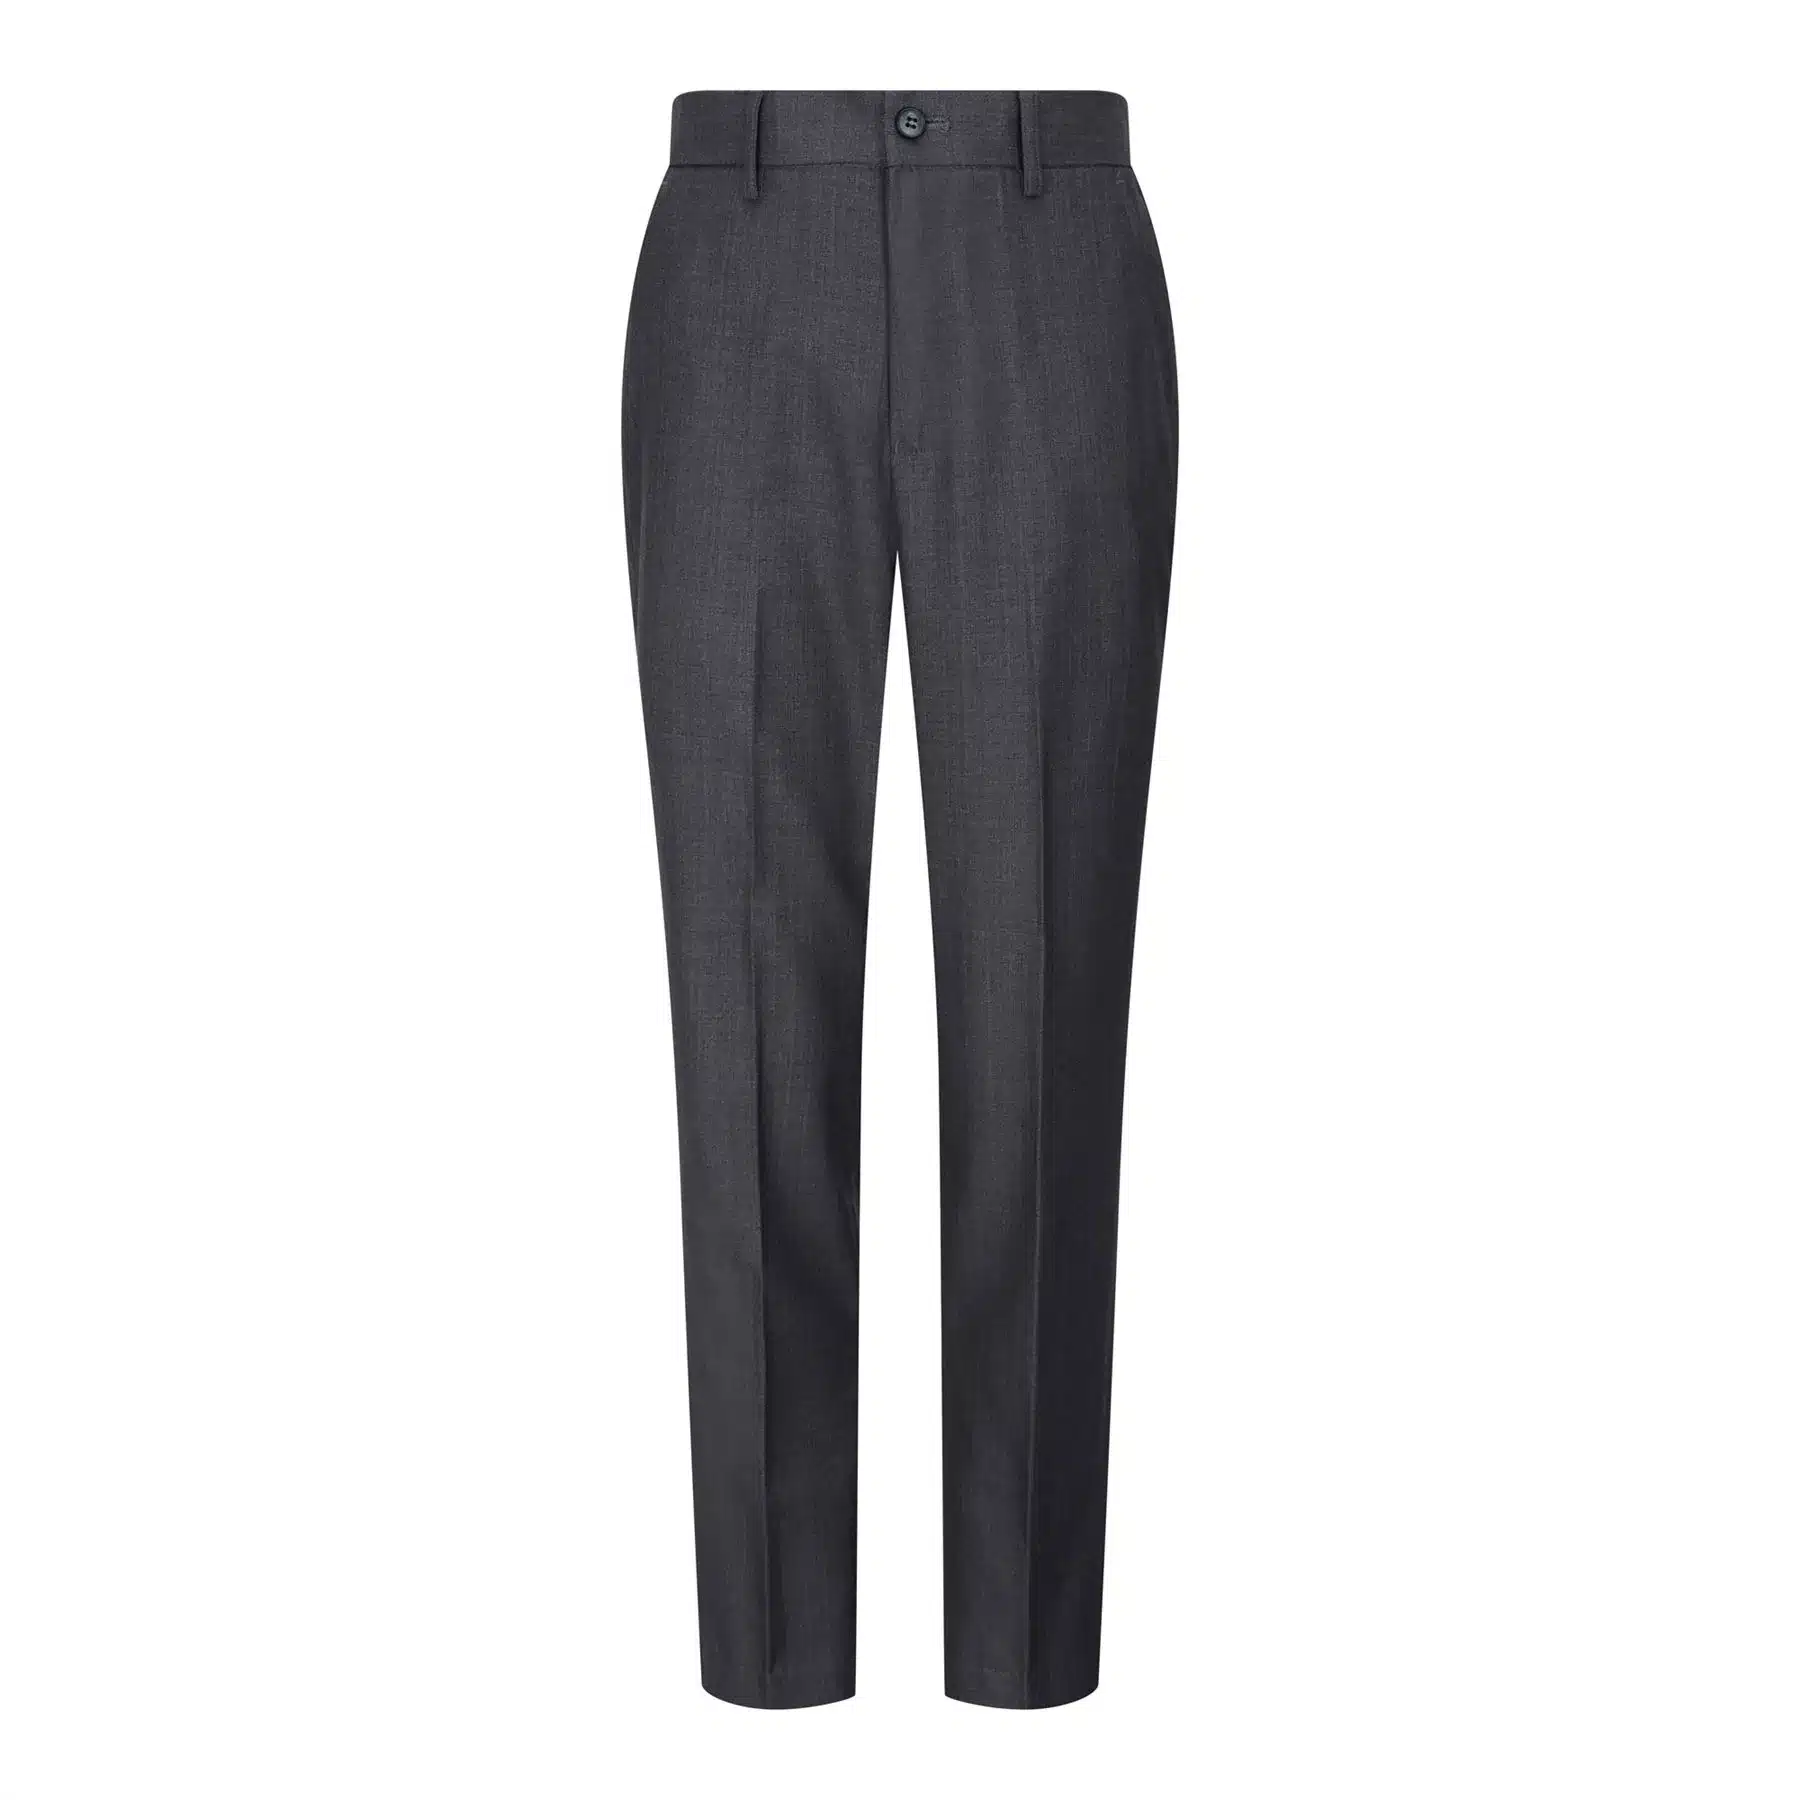 Moss Bros Suit Trousers - Skinny Fit - Dark Grey - 34IN - VISION WORLD TECH  PVT LTD